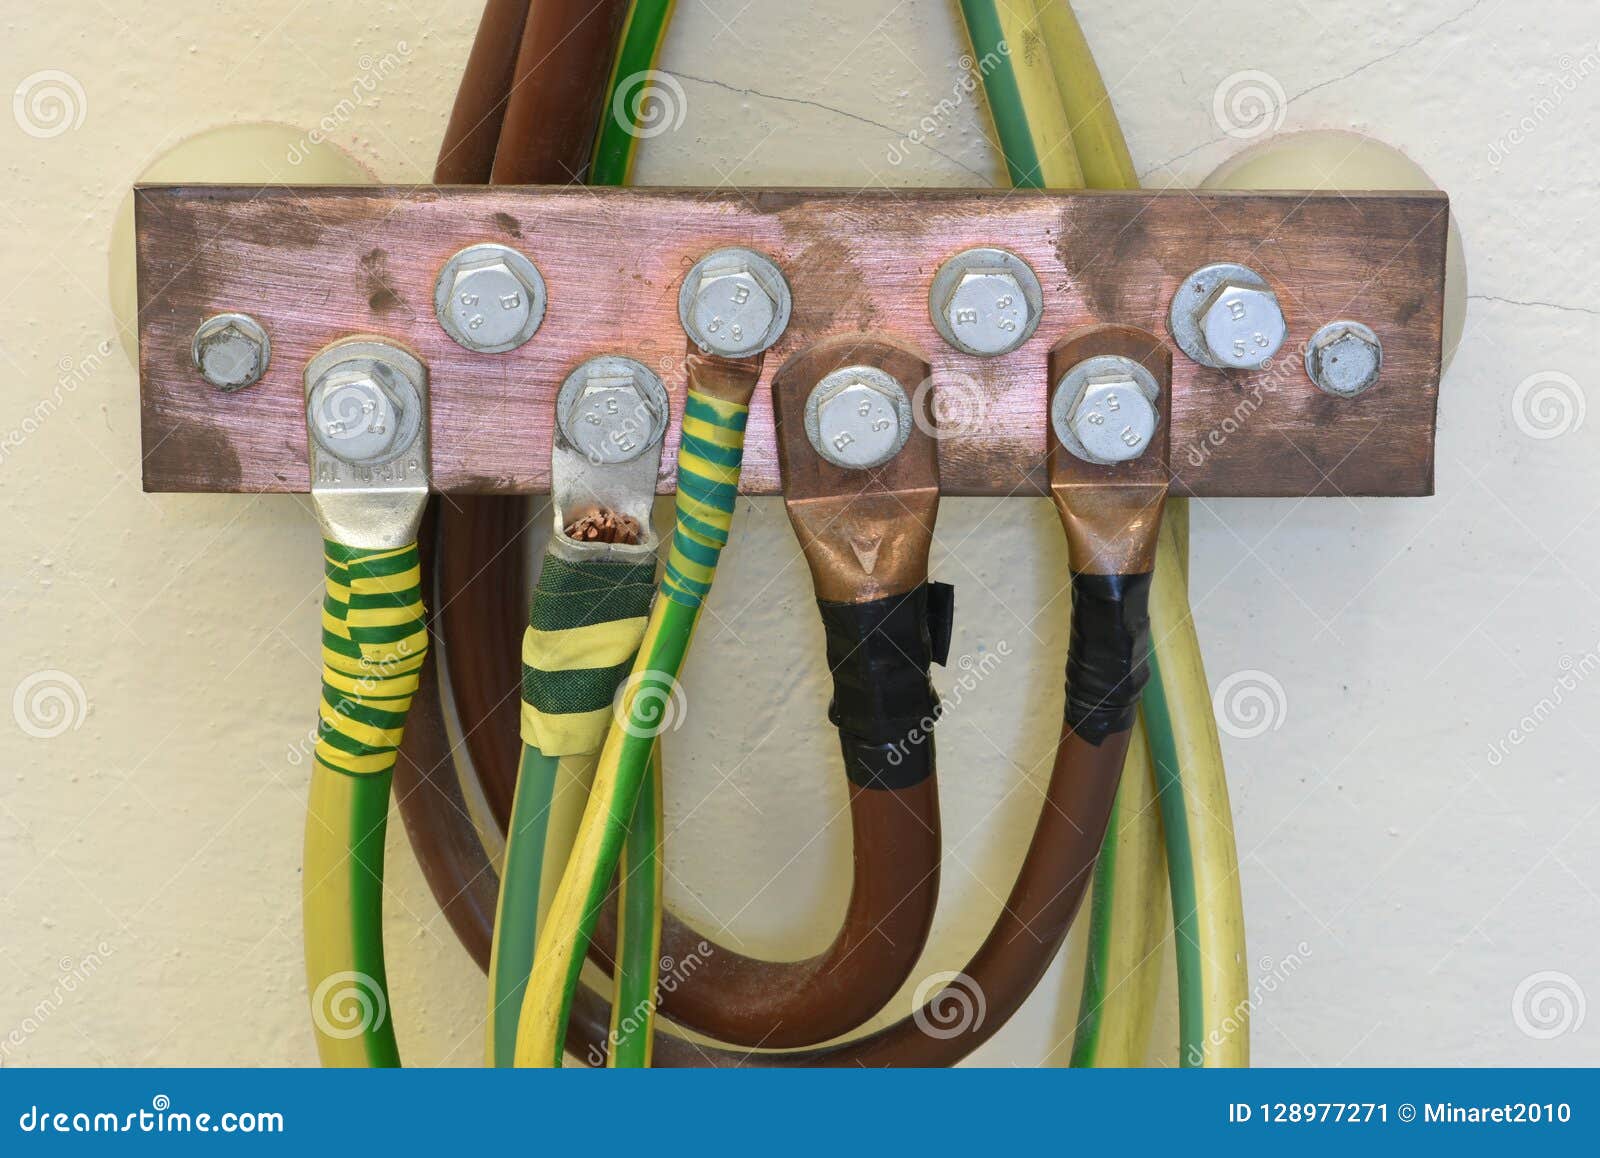 copper-ground-bus-bar-cables-copper-ground-bus-bar-cables-wall-128977271.jpg